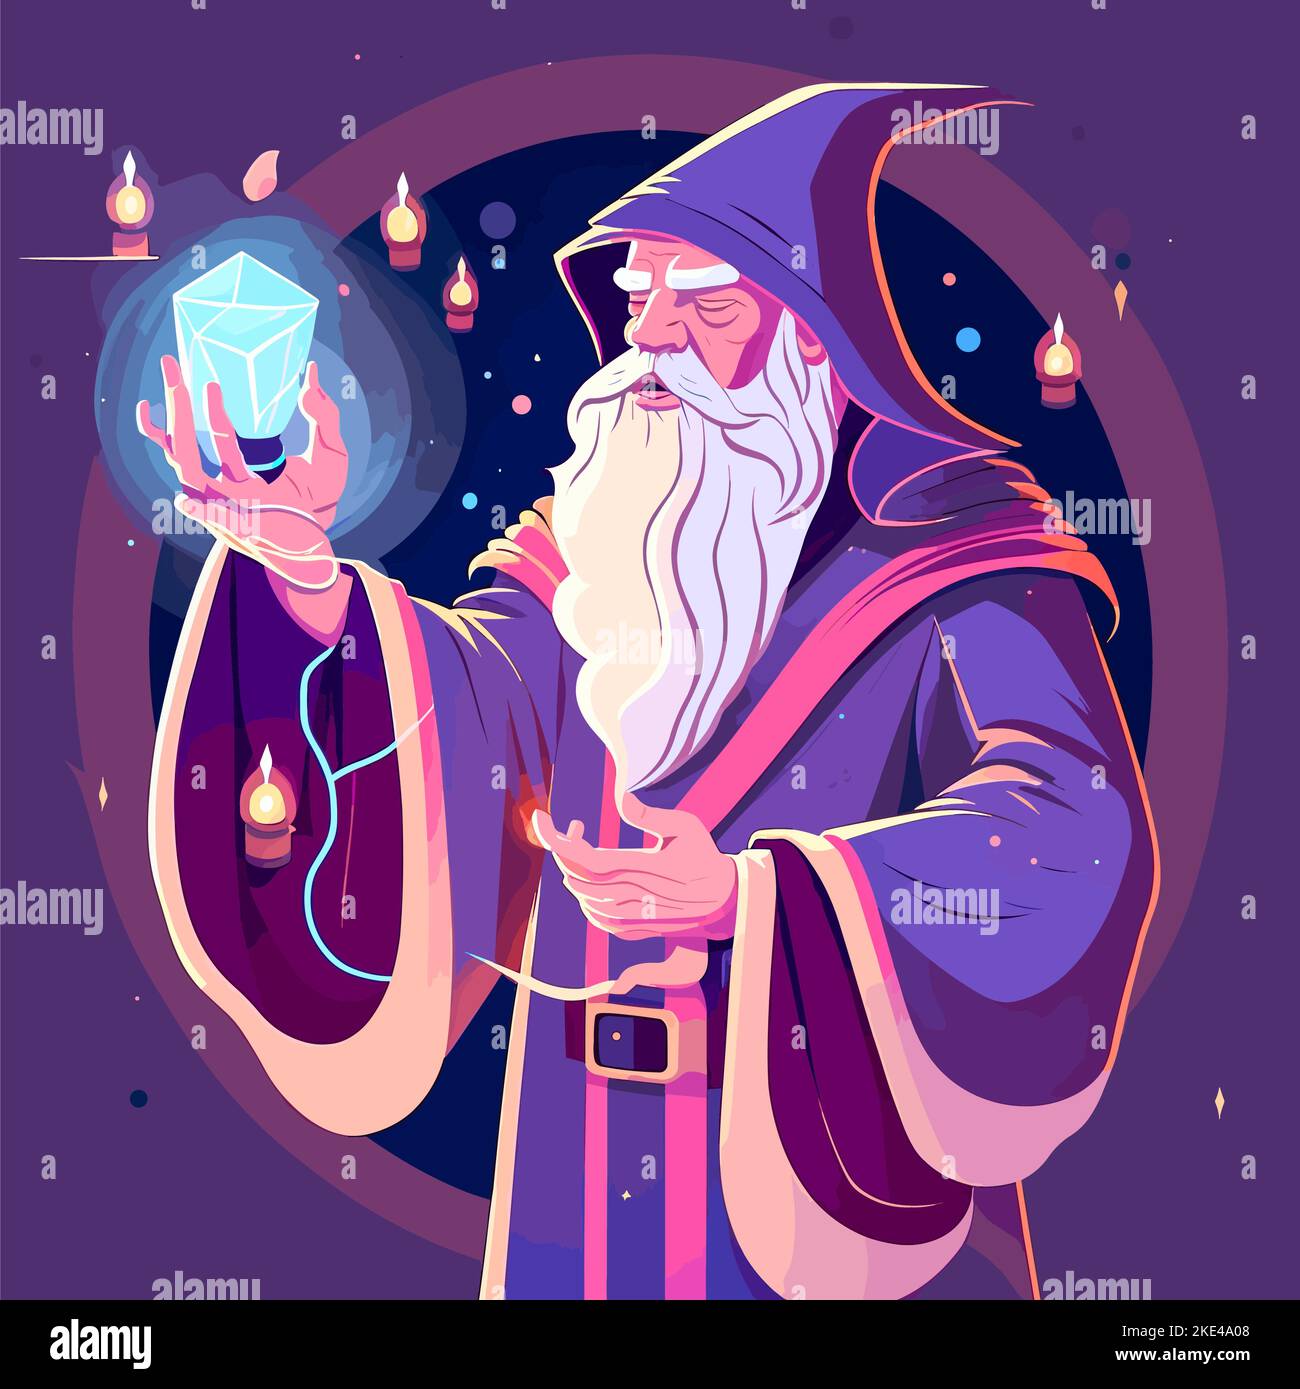 A Colourful Illustration Of A Wizard Casting A Magic Spell Stock Vector Image Art Alamy